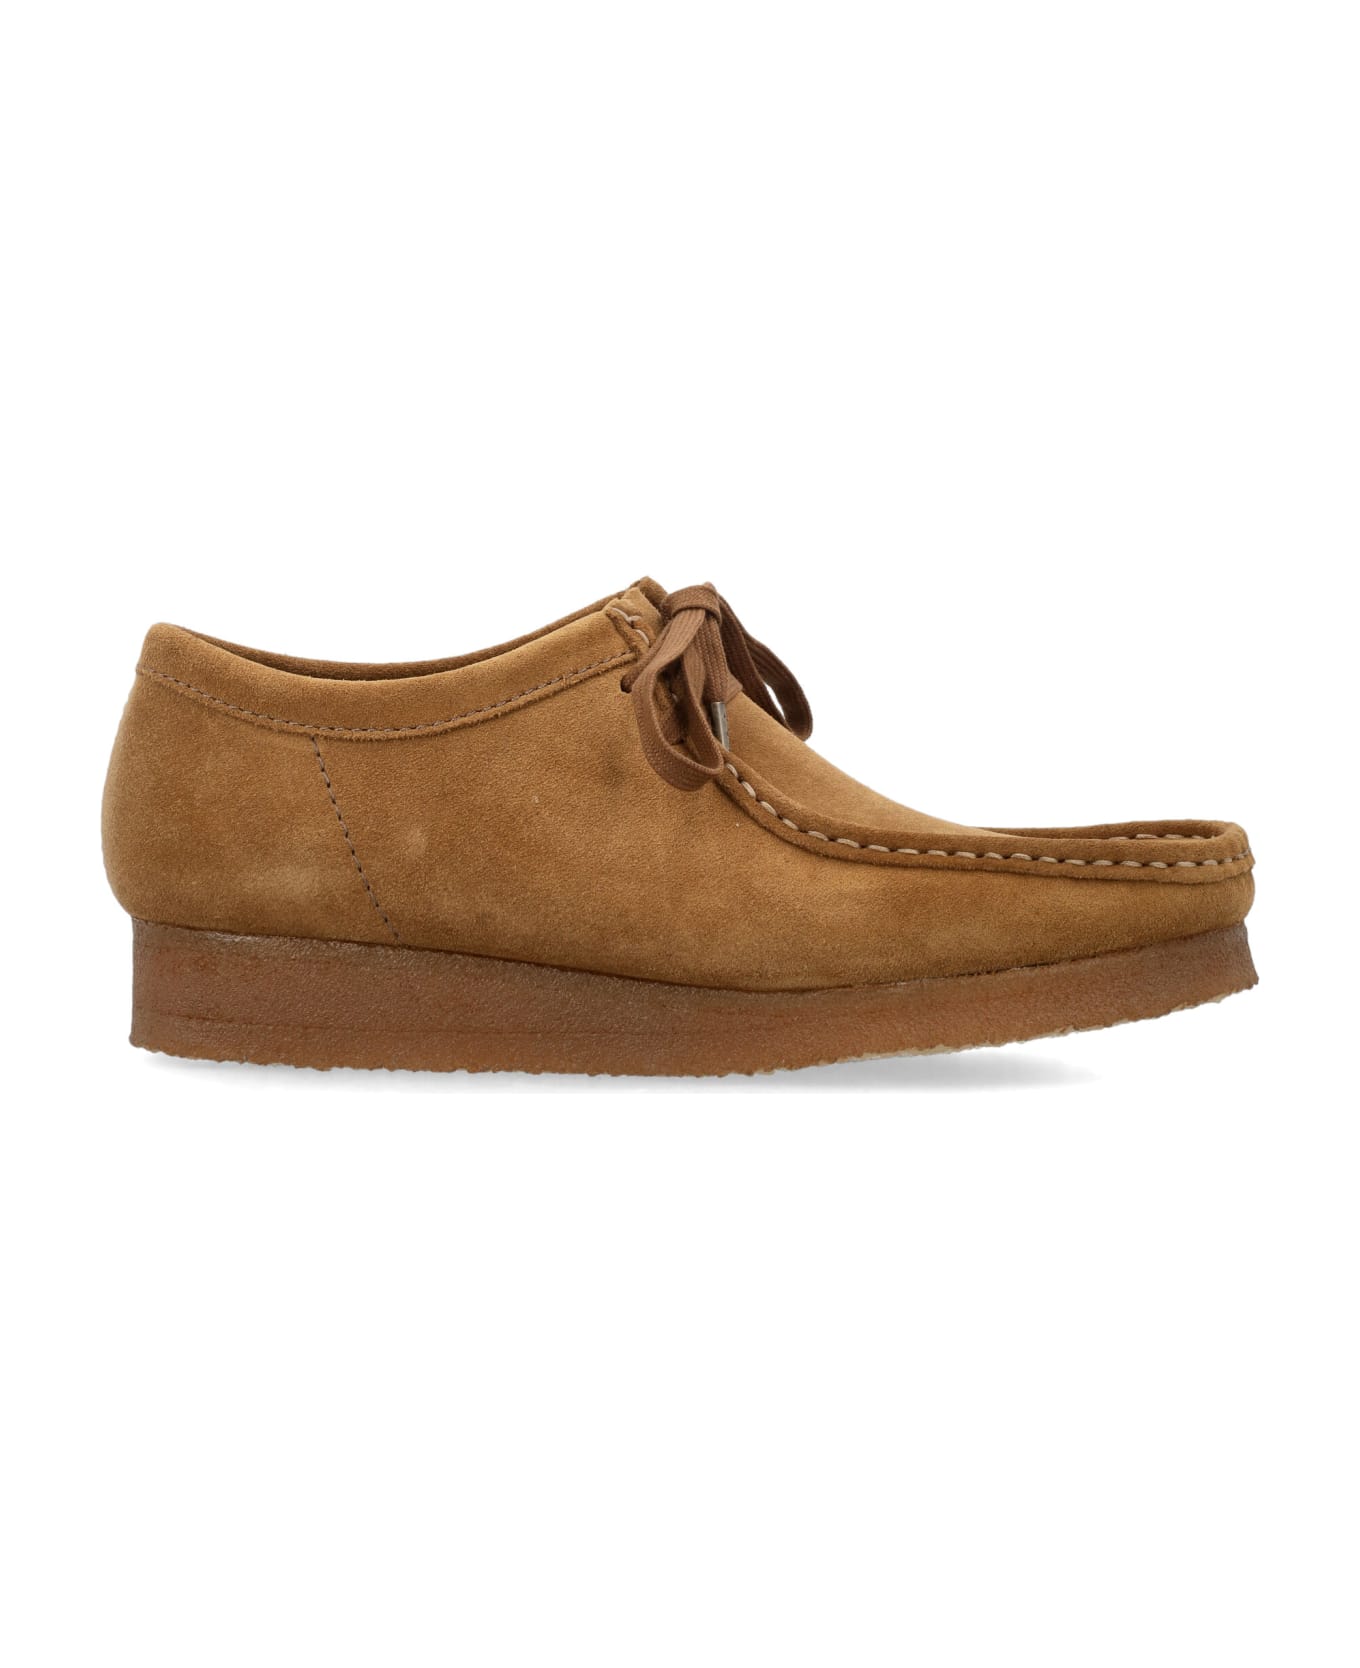 Clarks Wallabee - COLA SUEDE ローファー＆デッキシューズ